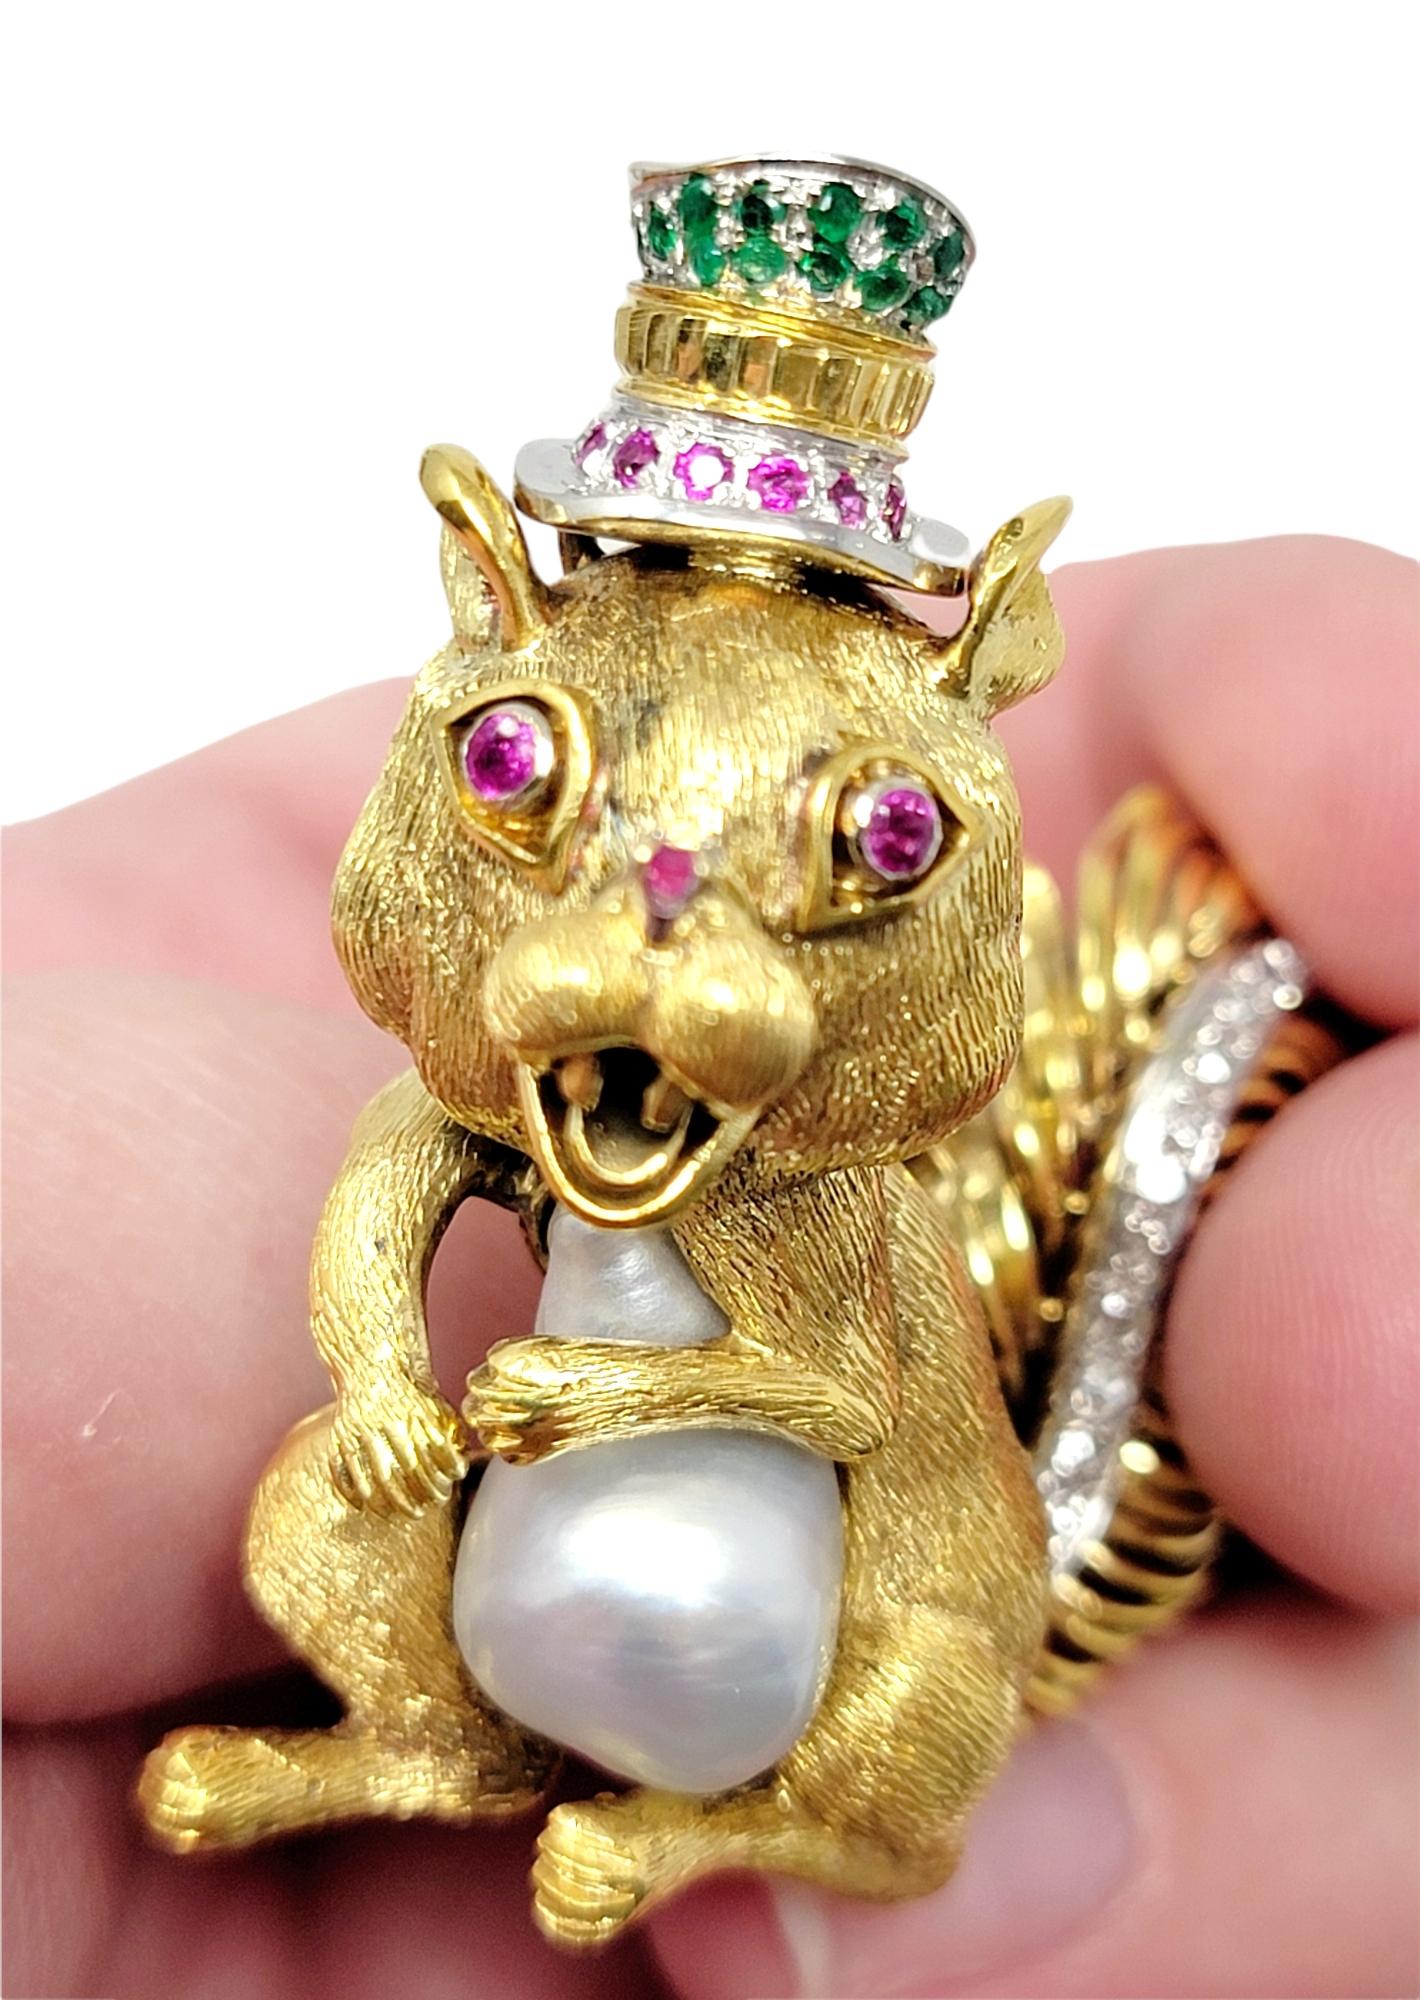 Diamond, Ruby, Emerald and Pearl Squirrel Brooch 14 Karat Yellow and White Gold In Good Condition For Sale In Scottsdale, AZ